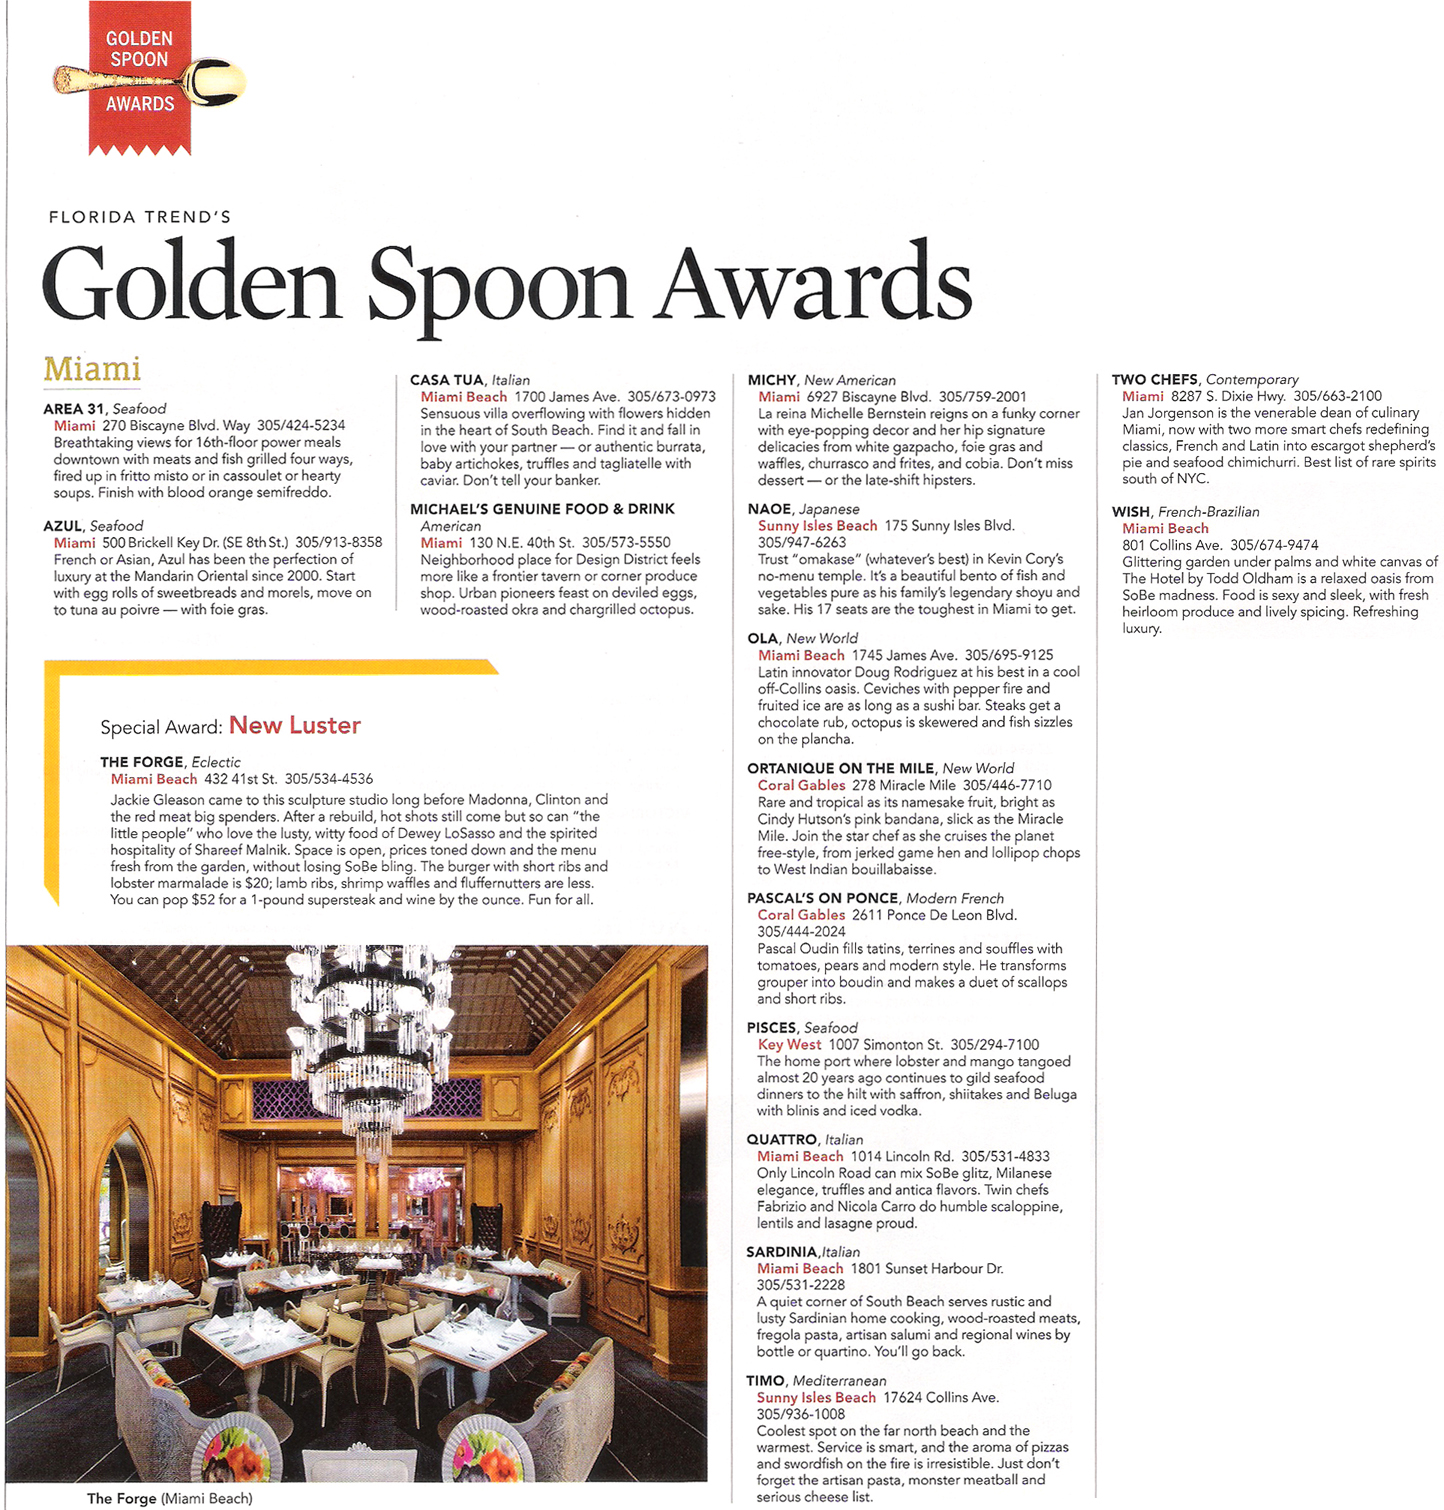 florida trend's golden spoon awards miami, area 31, azul, casa tua, the forge, michael's genuine food and drink, michy's, naoe, ola, ortanique on the mile, pascal's on ponce, pisces, quattro, sardinia, timo, two chefs, wish